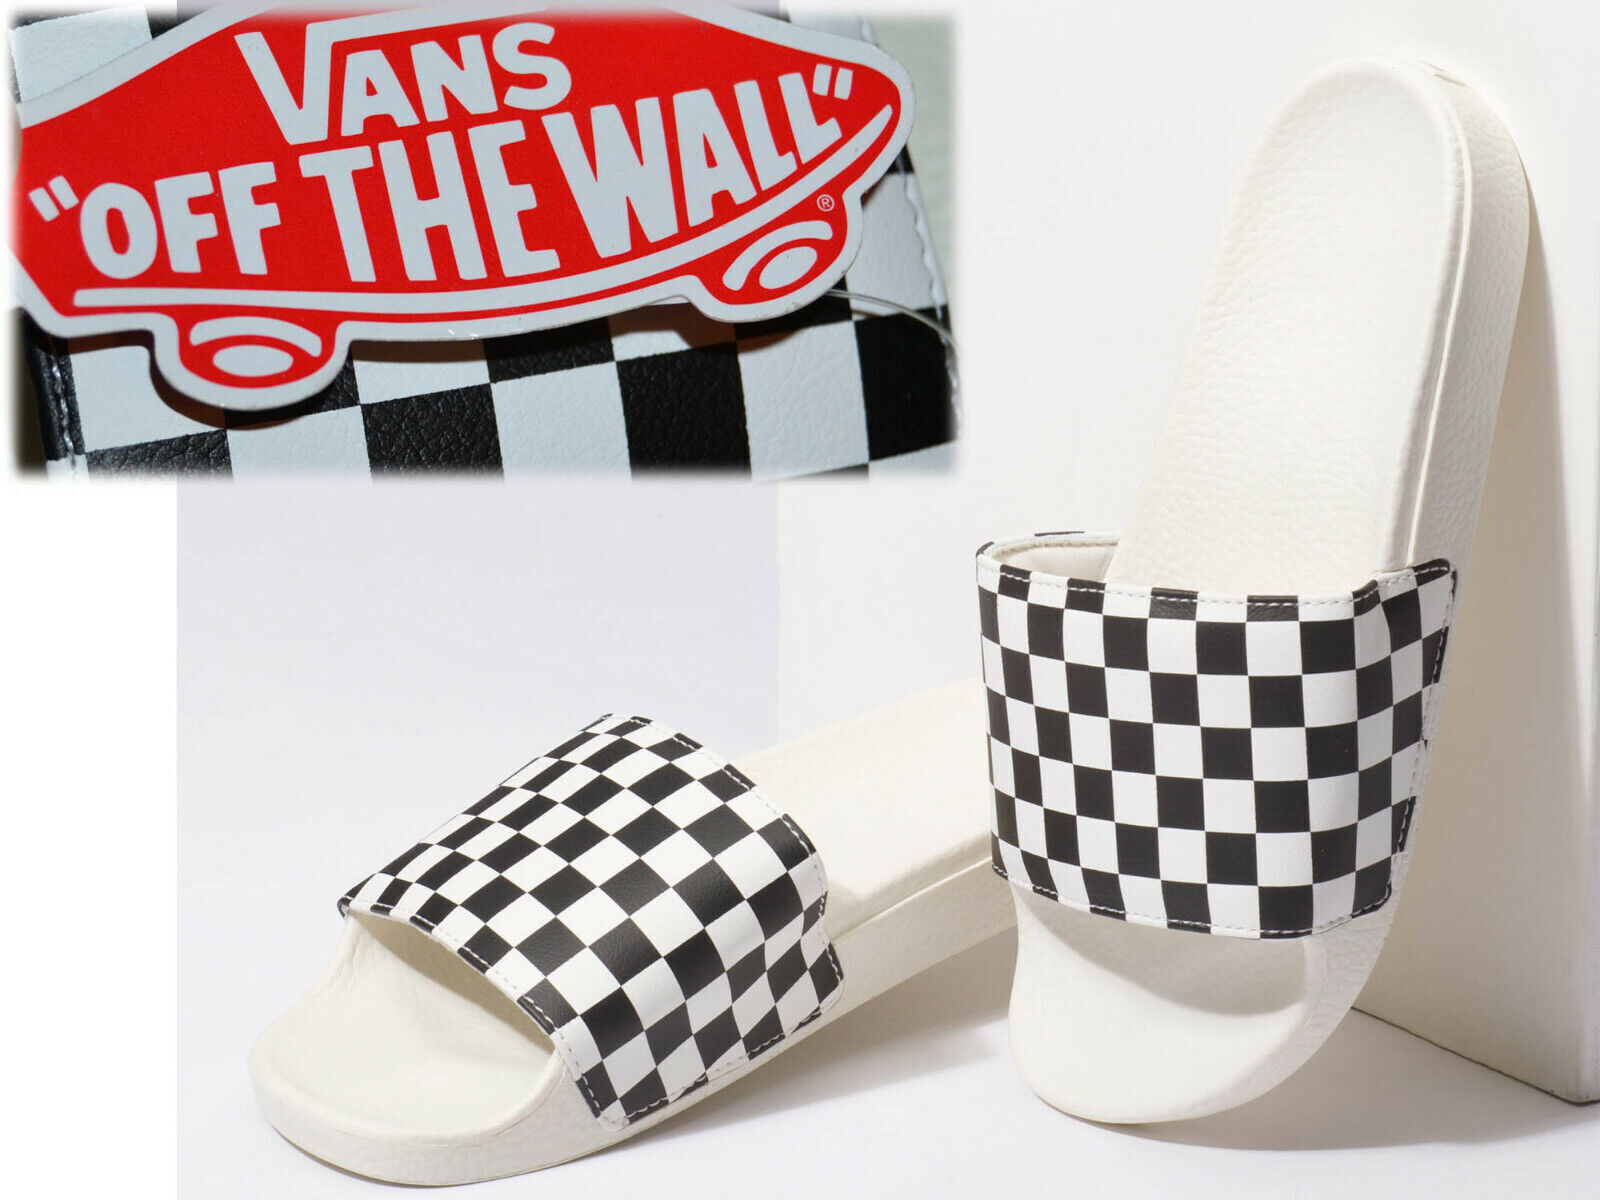 Primary image for VANS Unisex Sandals 42 and 43 EU / 9 and 10 US / 8 and 9 UK VA02 T2P